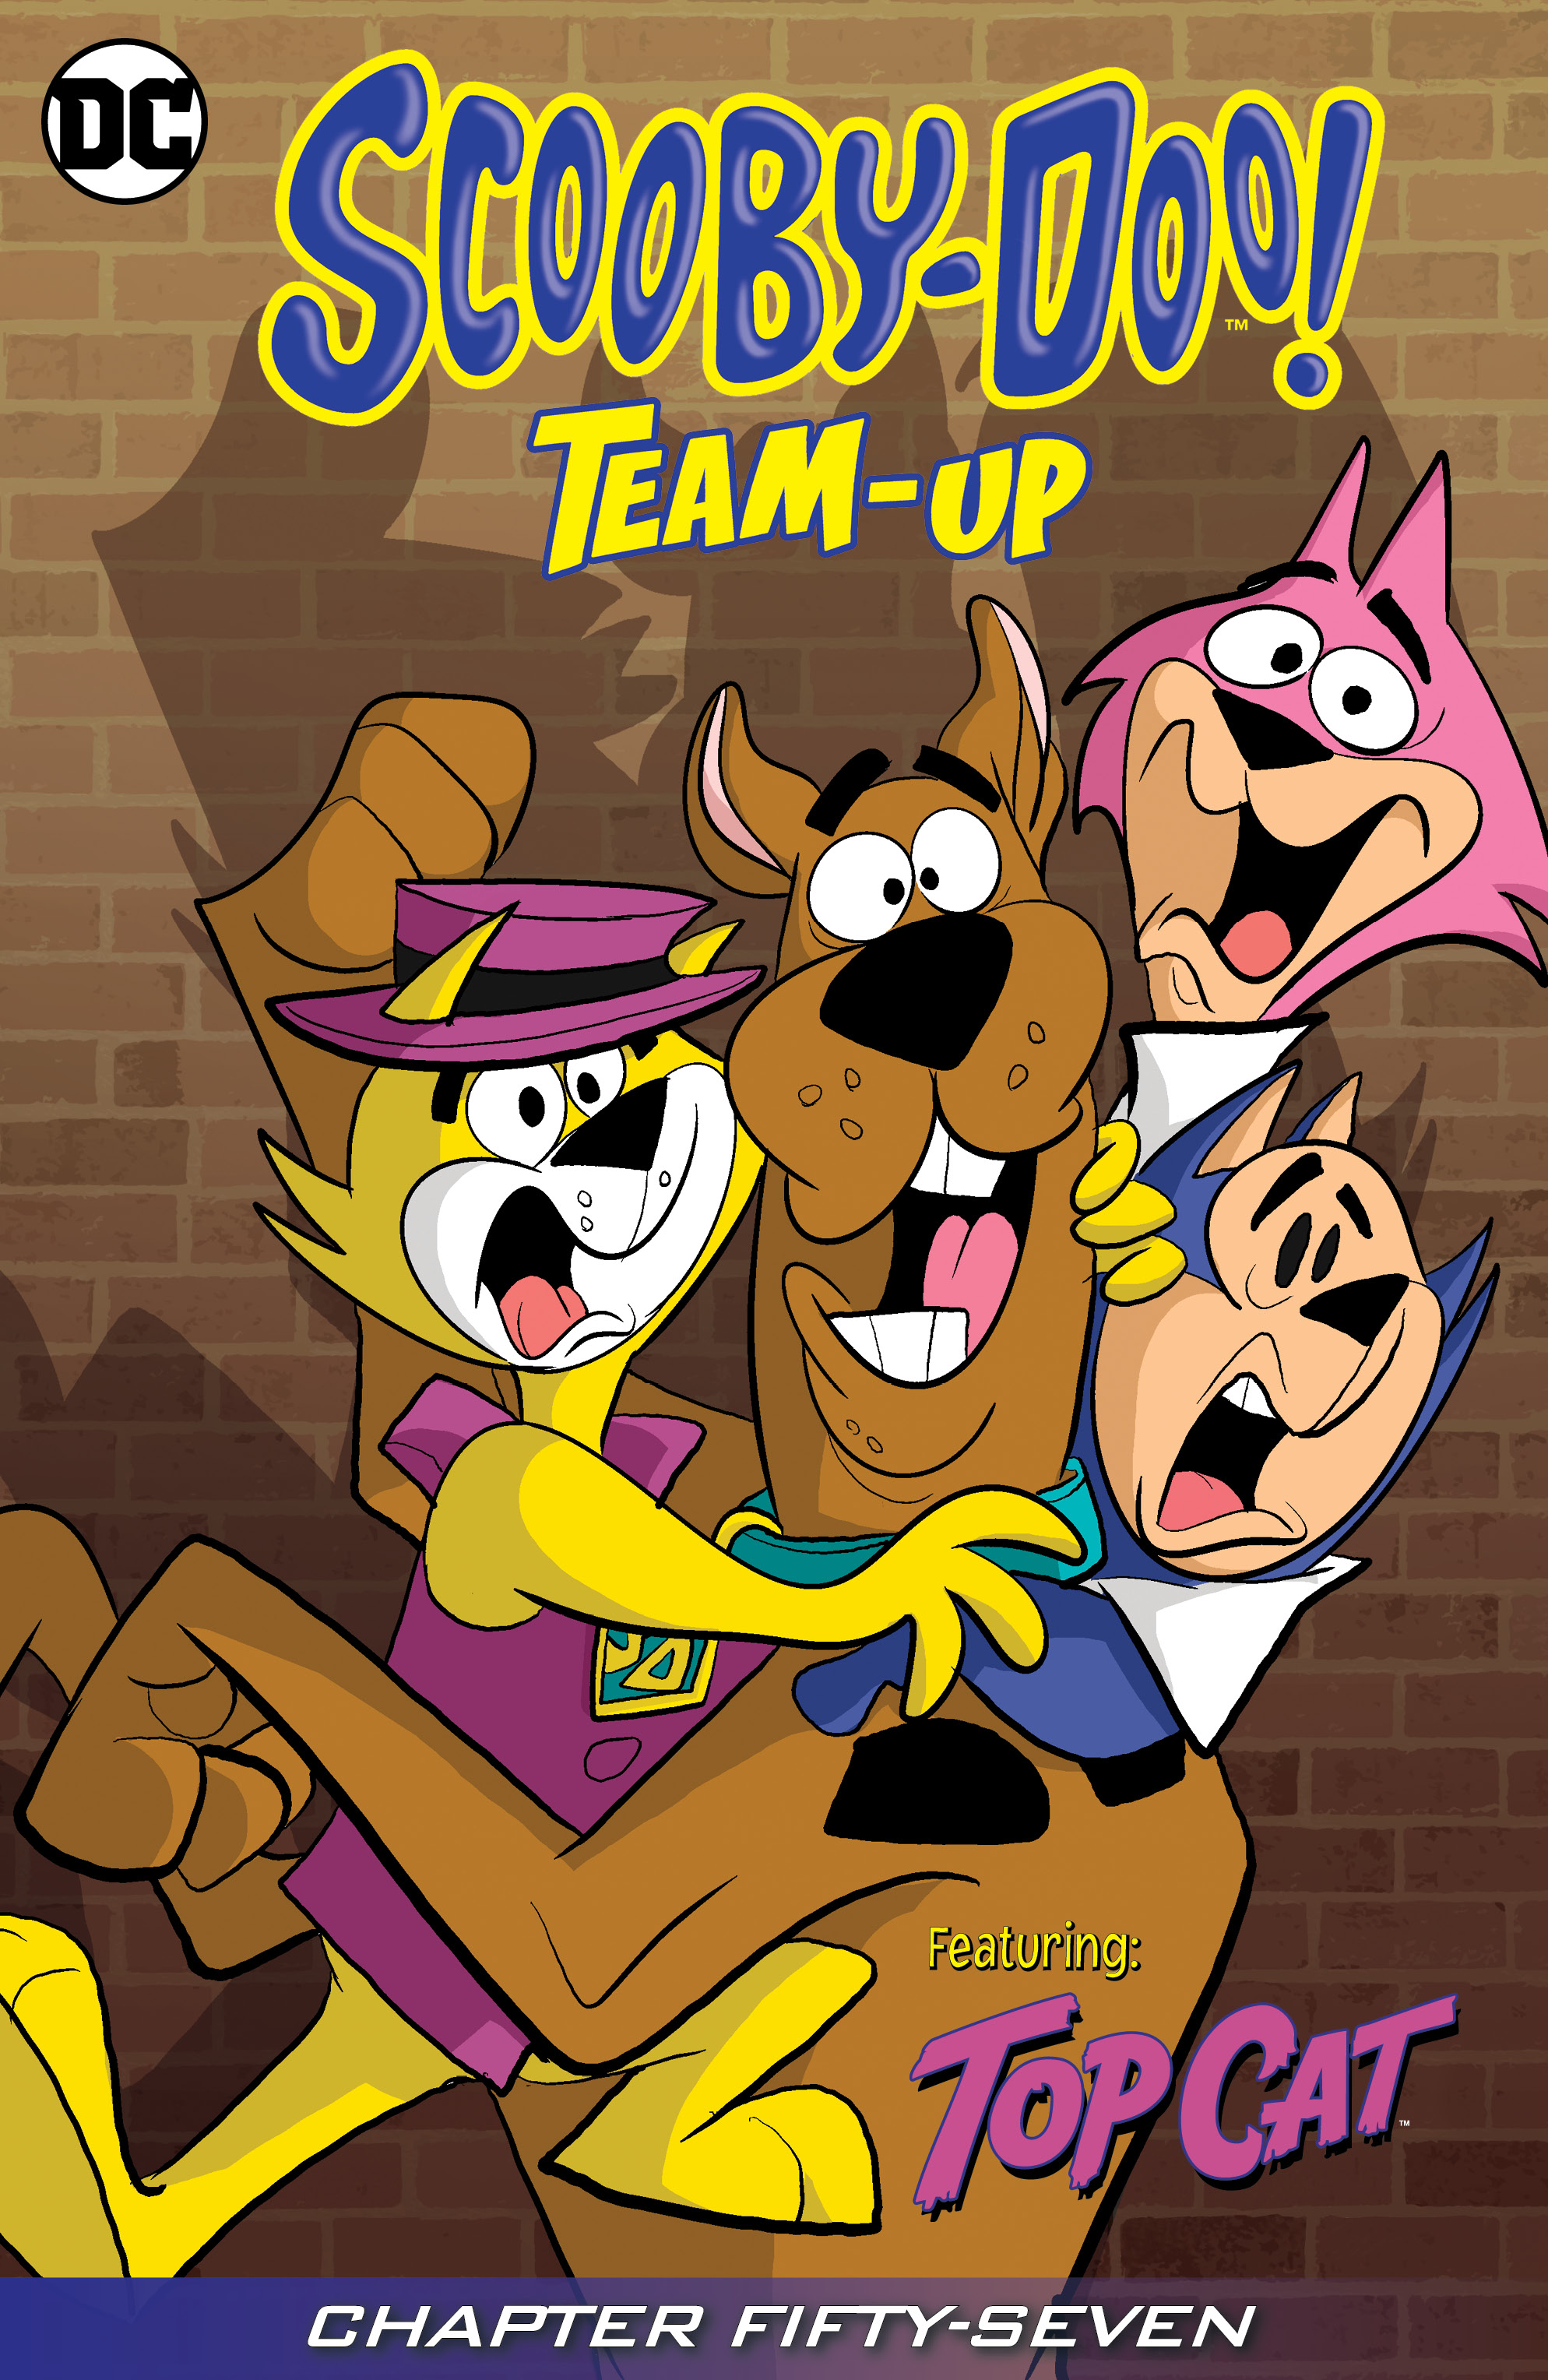 Scooby-Doo Team-Up #57 preview images